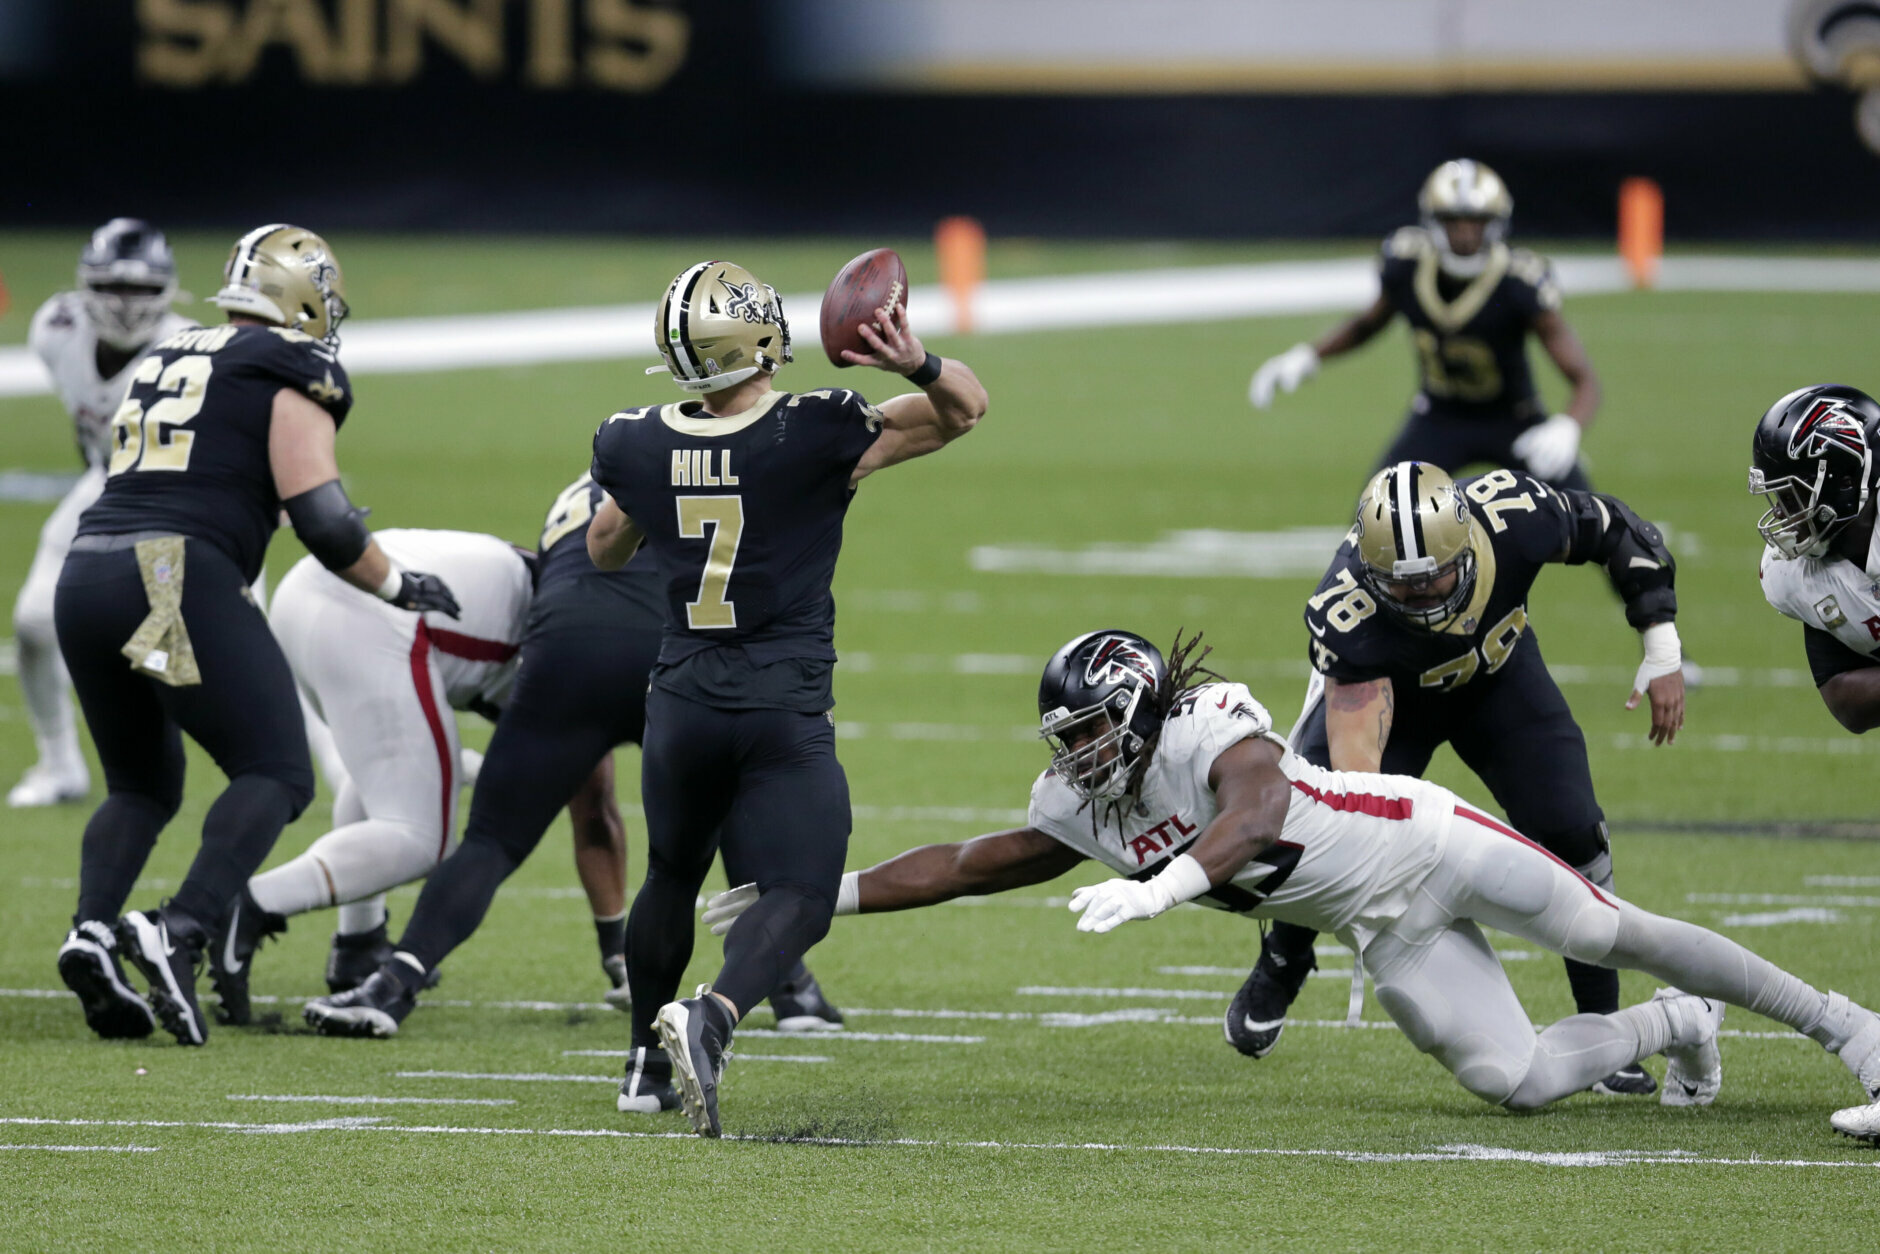 <p><b><i>Falcons 9</i></b><br />
<b><i>Saints 24</i></b></p>
<p>He certainly didn&#8217;t look like Steve Young, but Taysom Hill was good enough to lead New Orleans to a big win in the bayou that keeps the Saints undefeated in a competitive division. All Hill has to do is protect the ball against losing teams the next three weeks and this team will enter the Dec. 20 game against the Chiefs at 11-2.</p>
